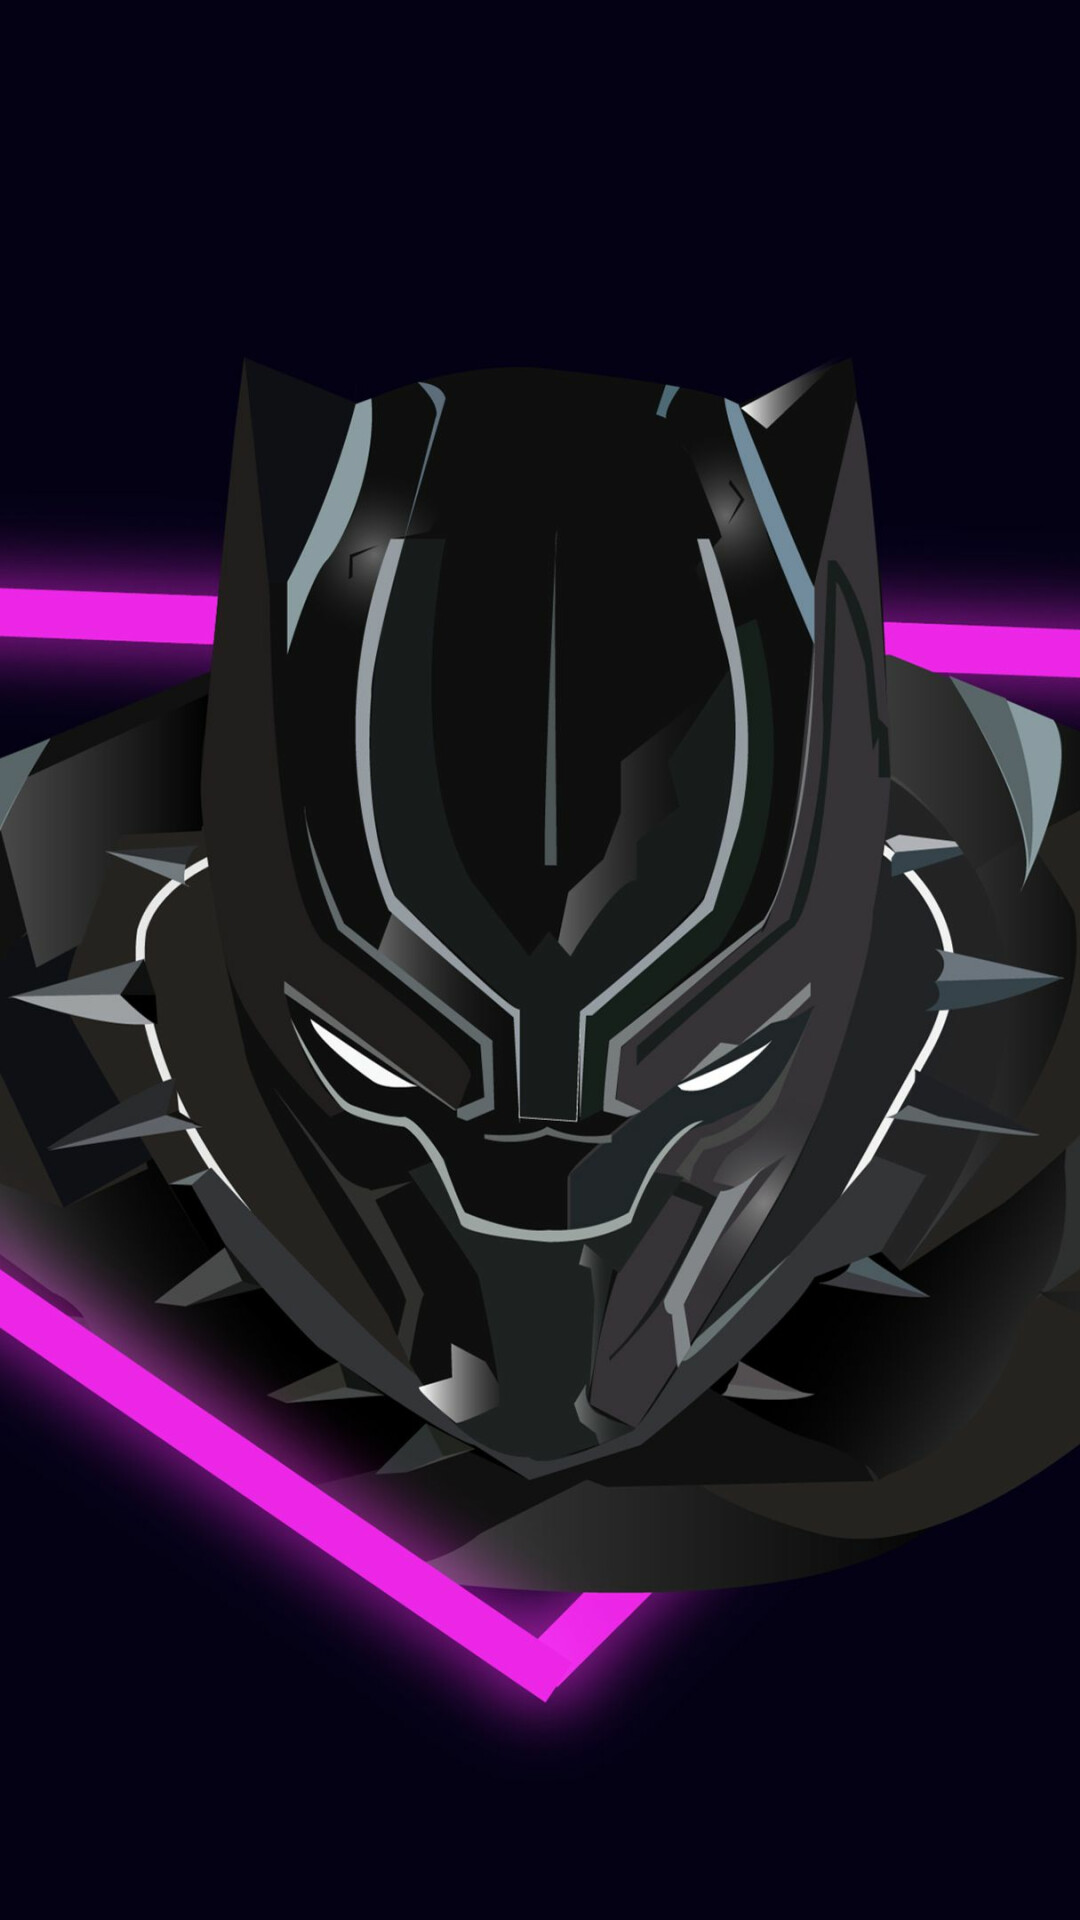 Black Panther: Wakanda Forever: One of the first Black comic book superheroes in the United States. 1080x1920 Full HD Background.